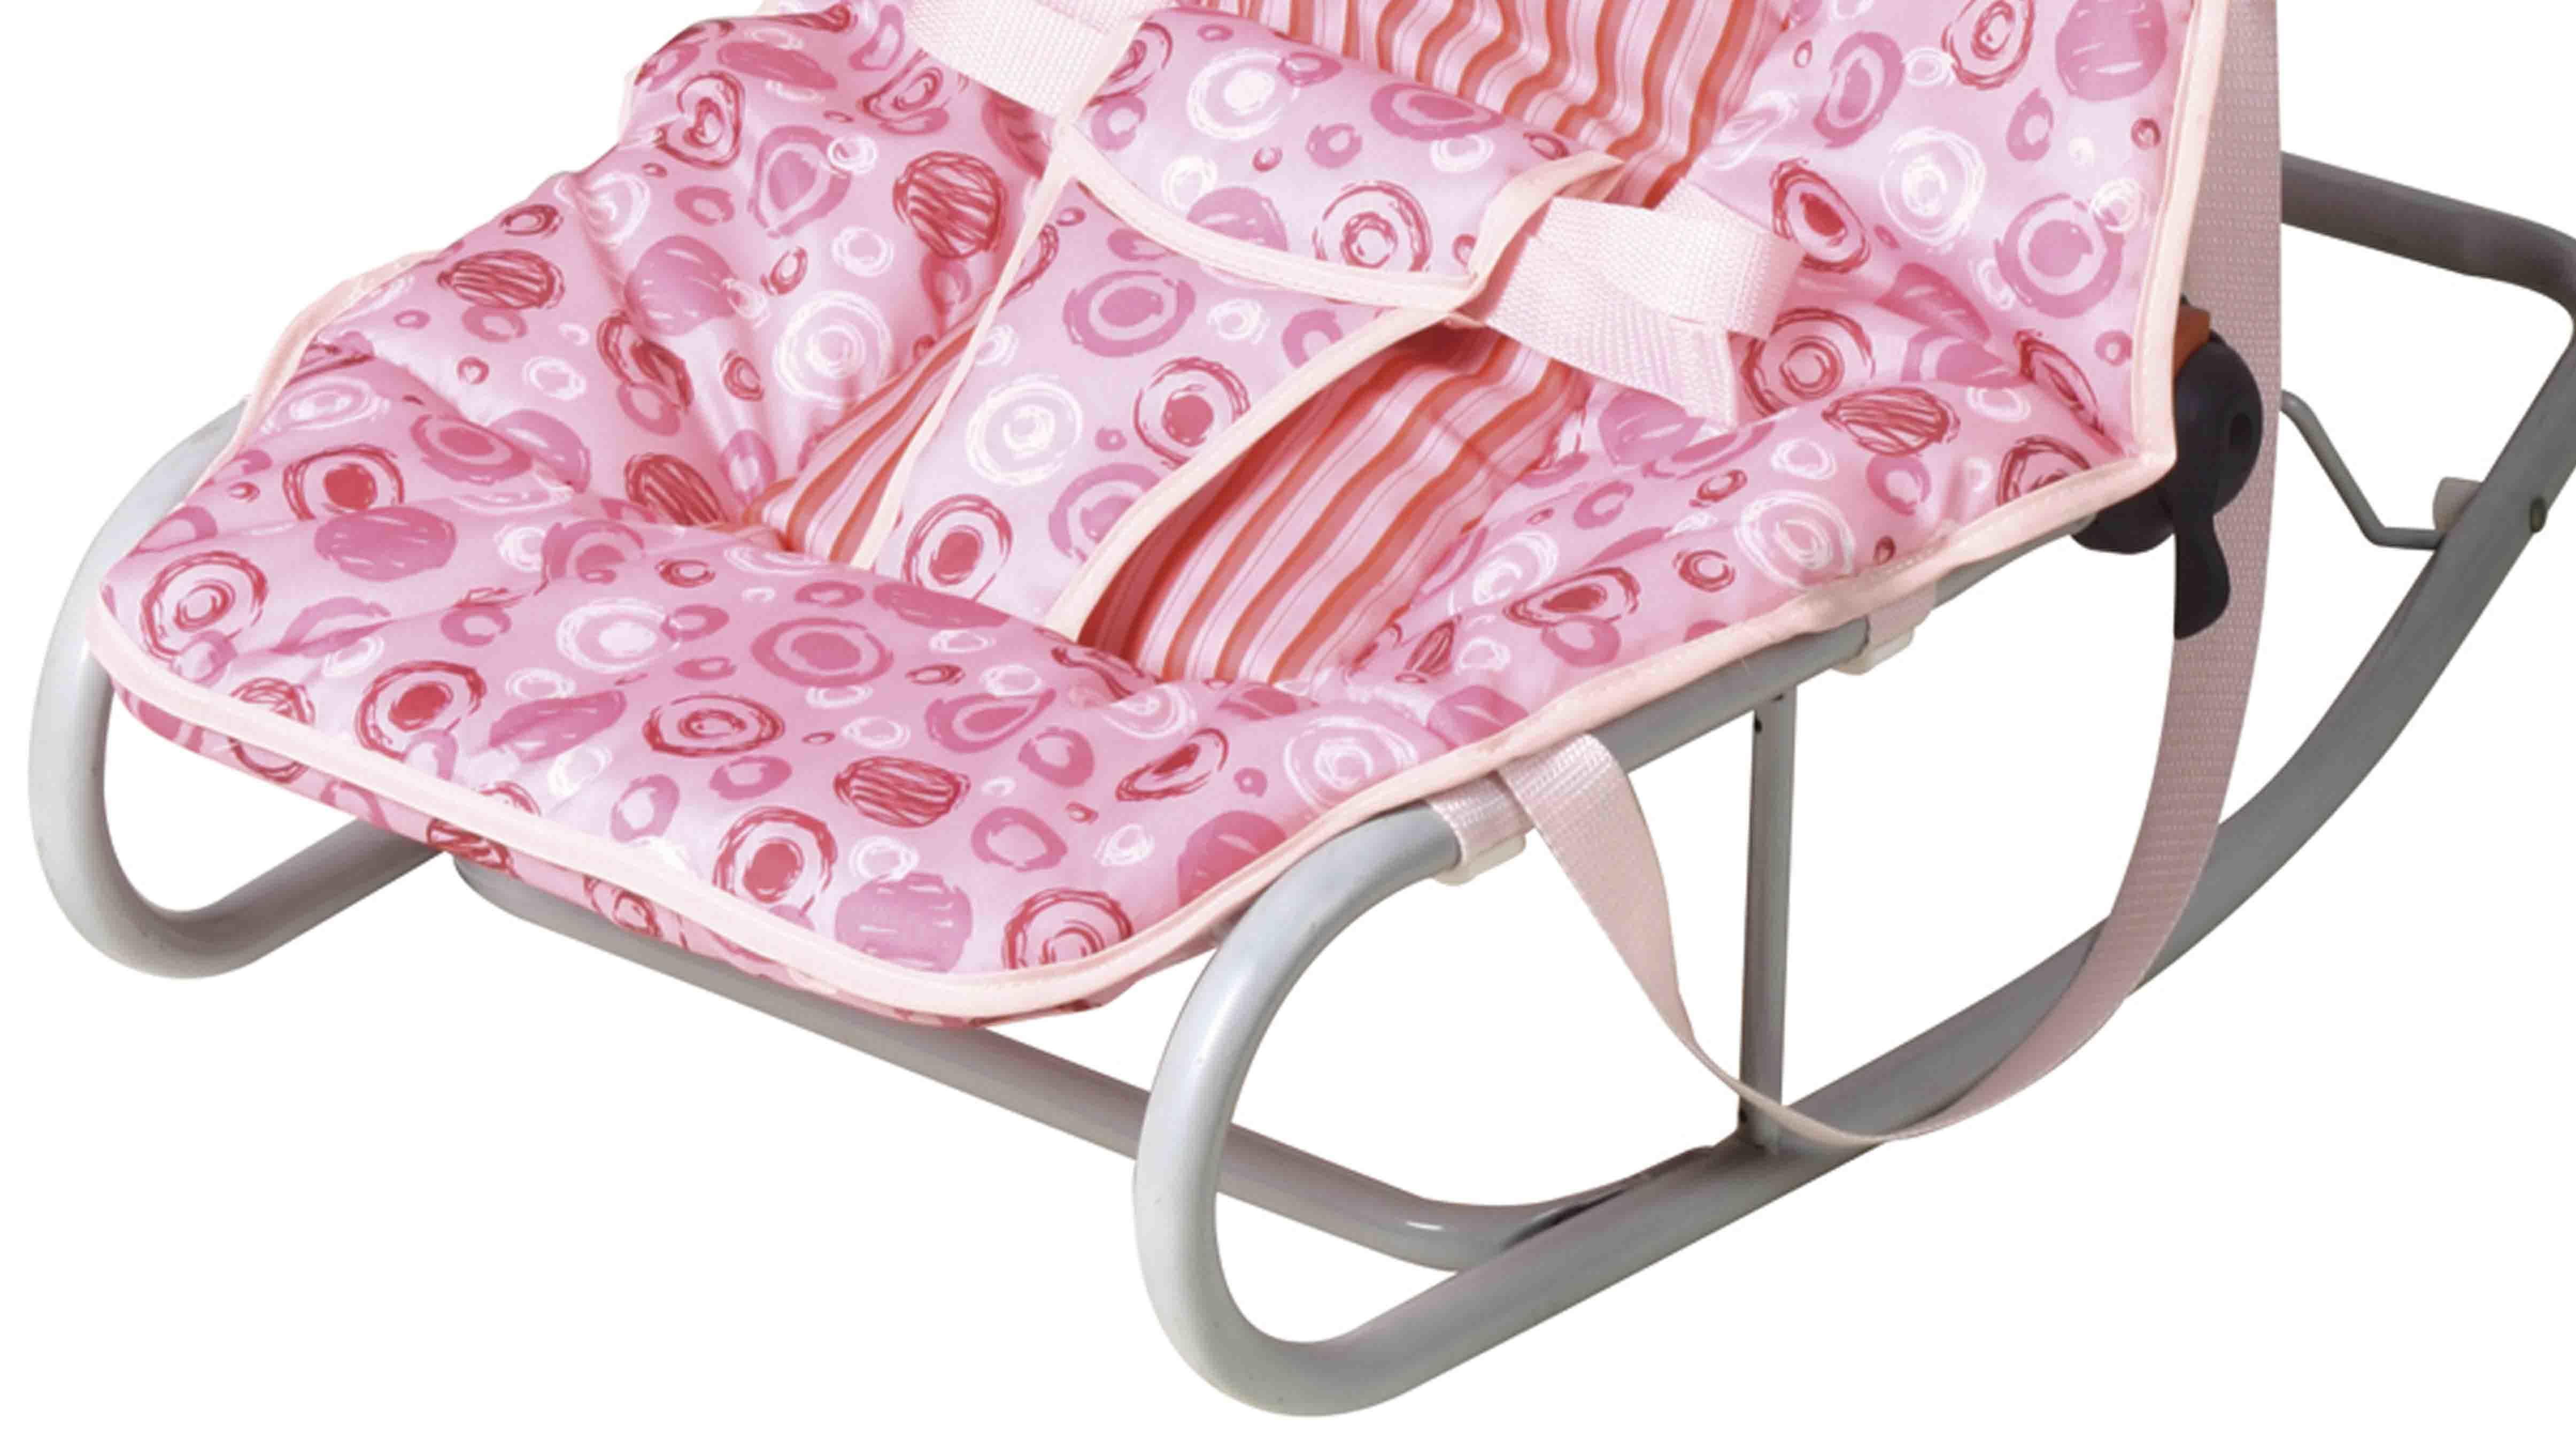 Aoqi professional baby rocker sale factory price for bedroom-3